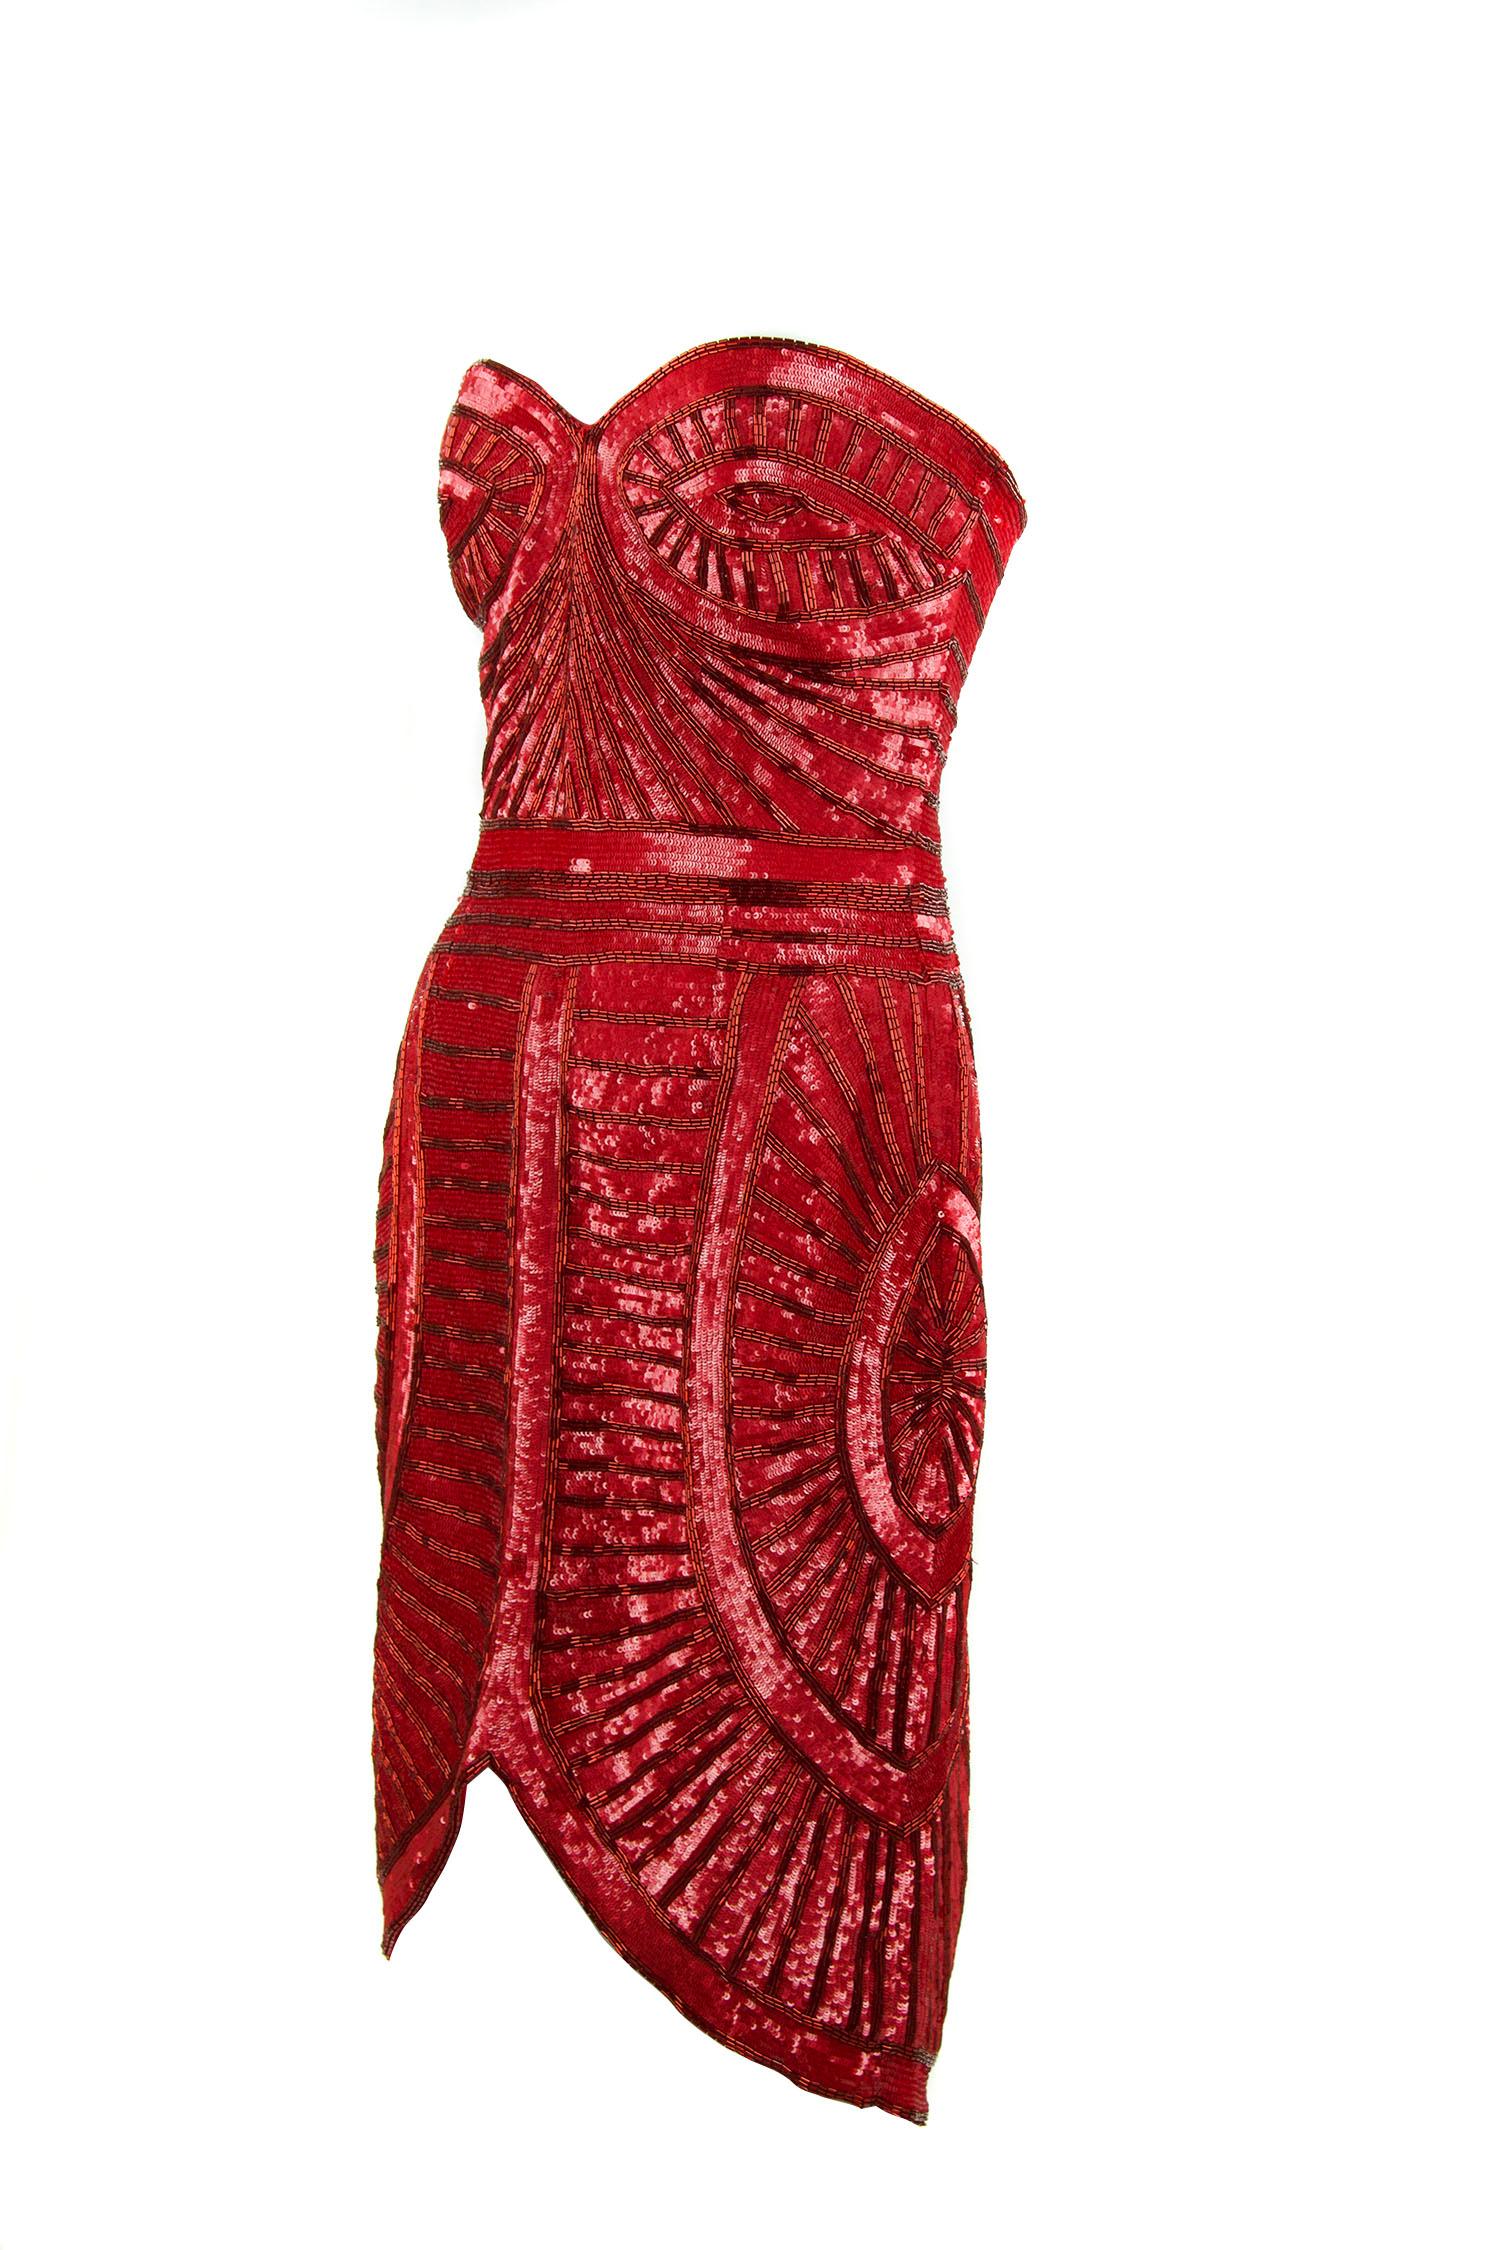 Incredible geometric beading on this Zuhair Murad red beaded cocktail dress with a sweetheart neckline and fitted silhouette.  In a beautiful deep red color, this dress is certain to shine at a cocktail or black tie event.  Features boning for extra